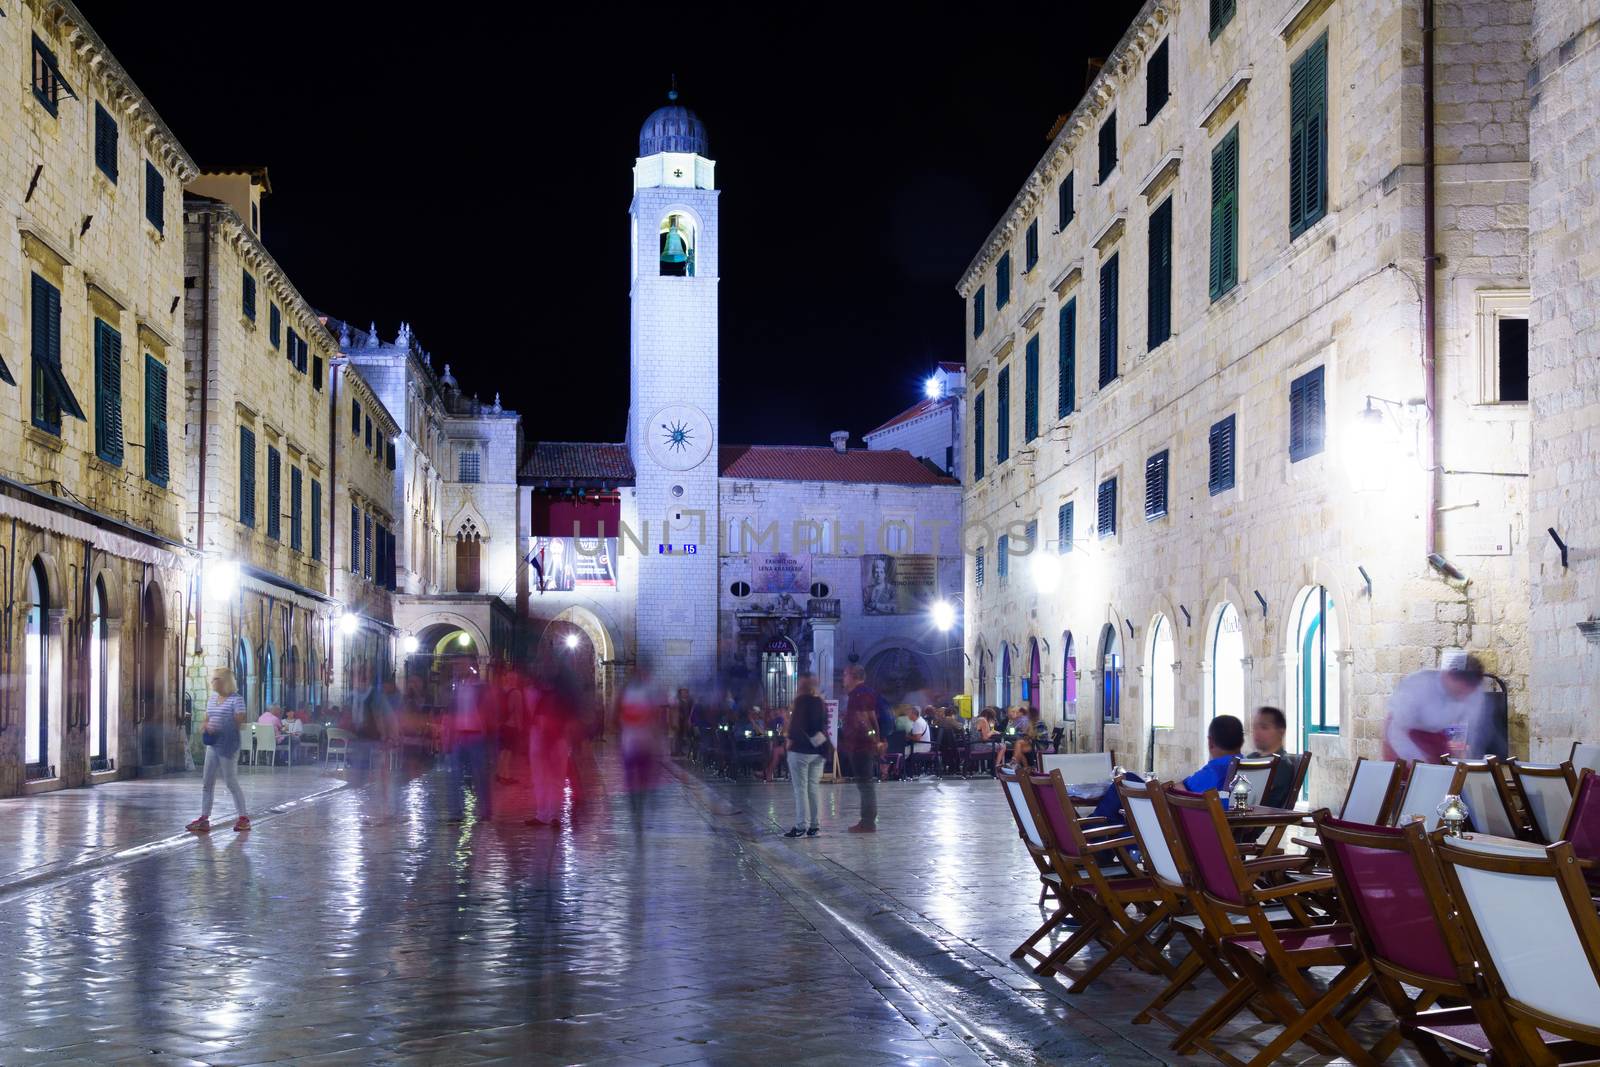 DUBROVNIK, CROATIA - JUNE 26, 2015: Night scene in the main street with Orlando's column, the bell tower, locals and tourists, in Dubrovnik, Croatia